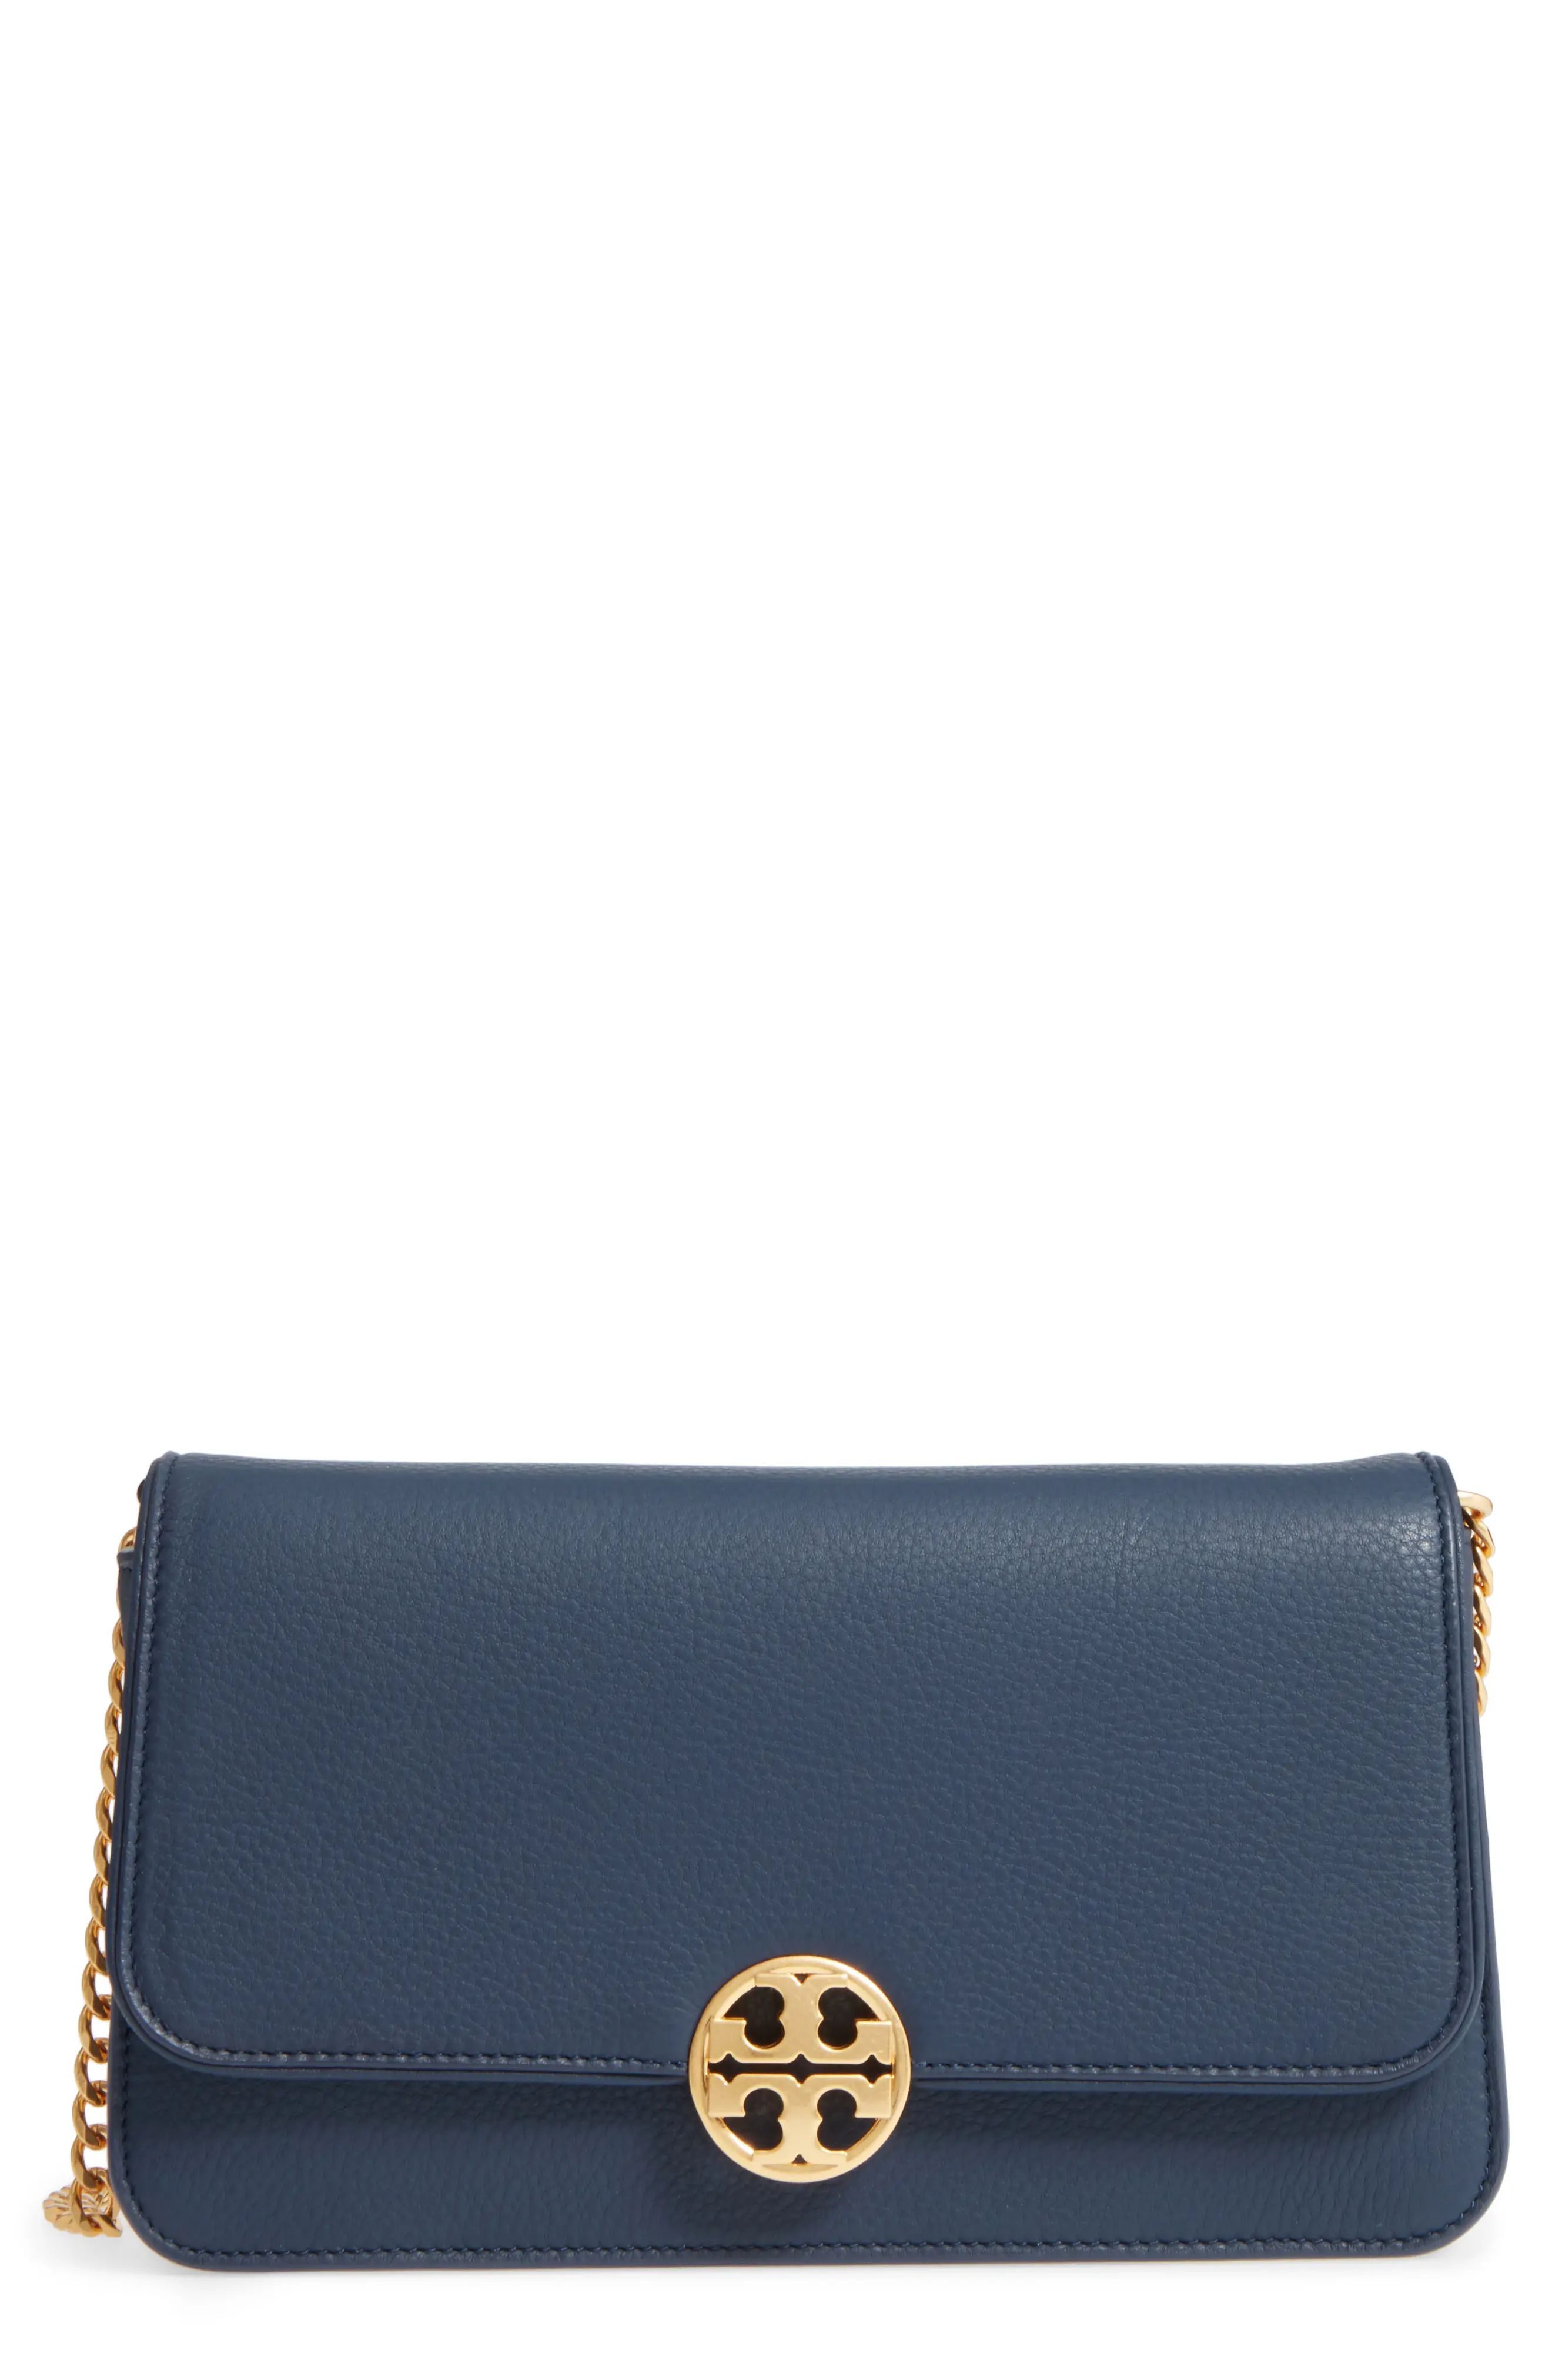 Chelsea Convertible Leather Clutch | Nordstrom